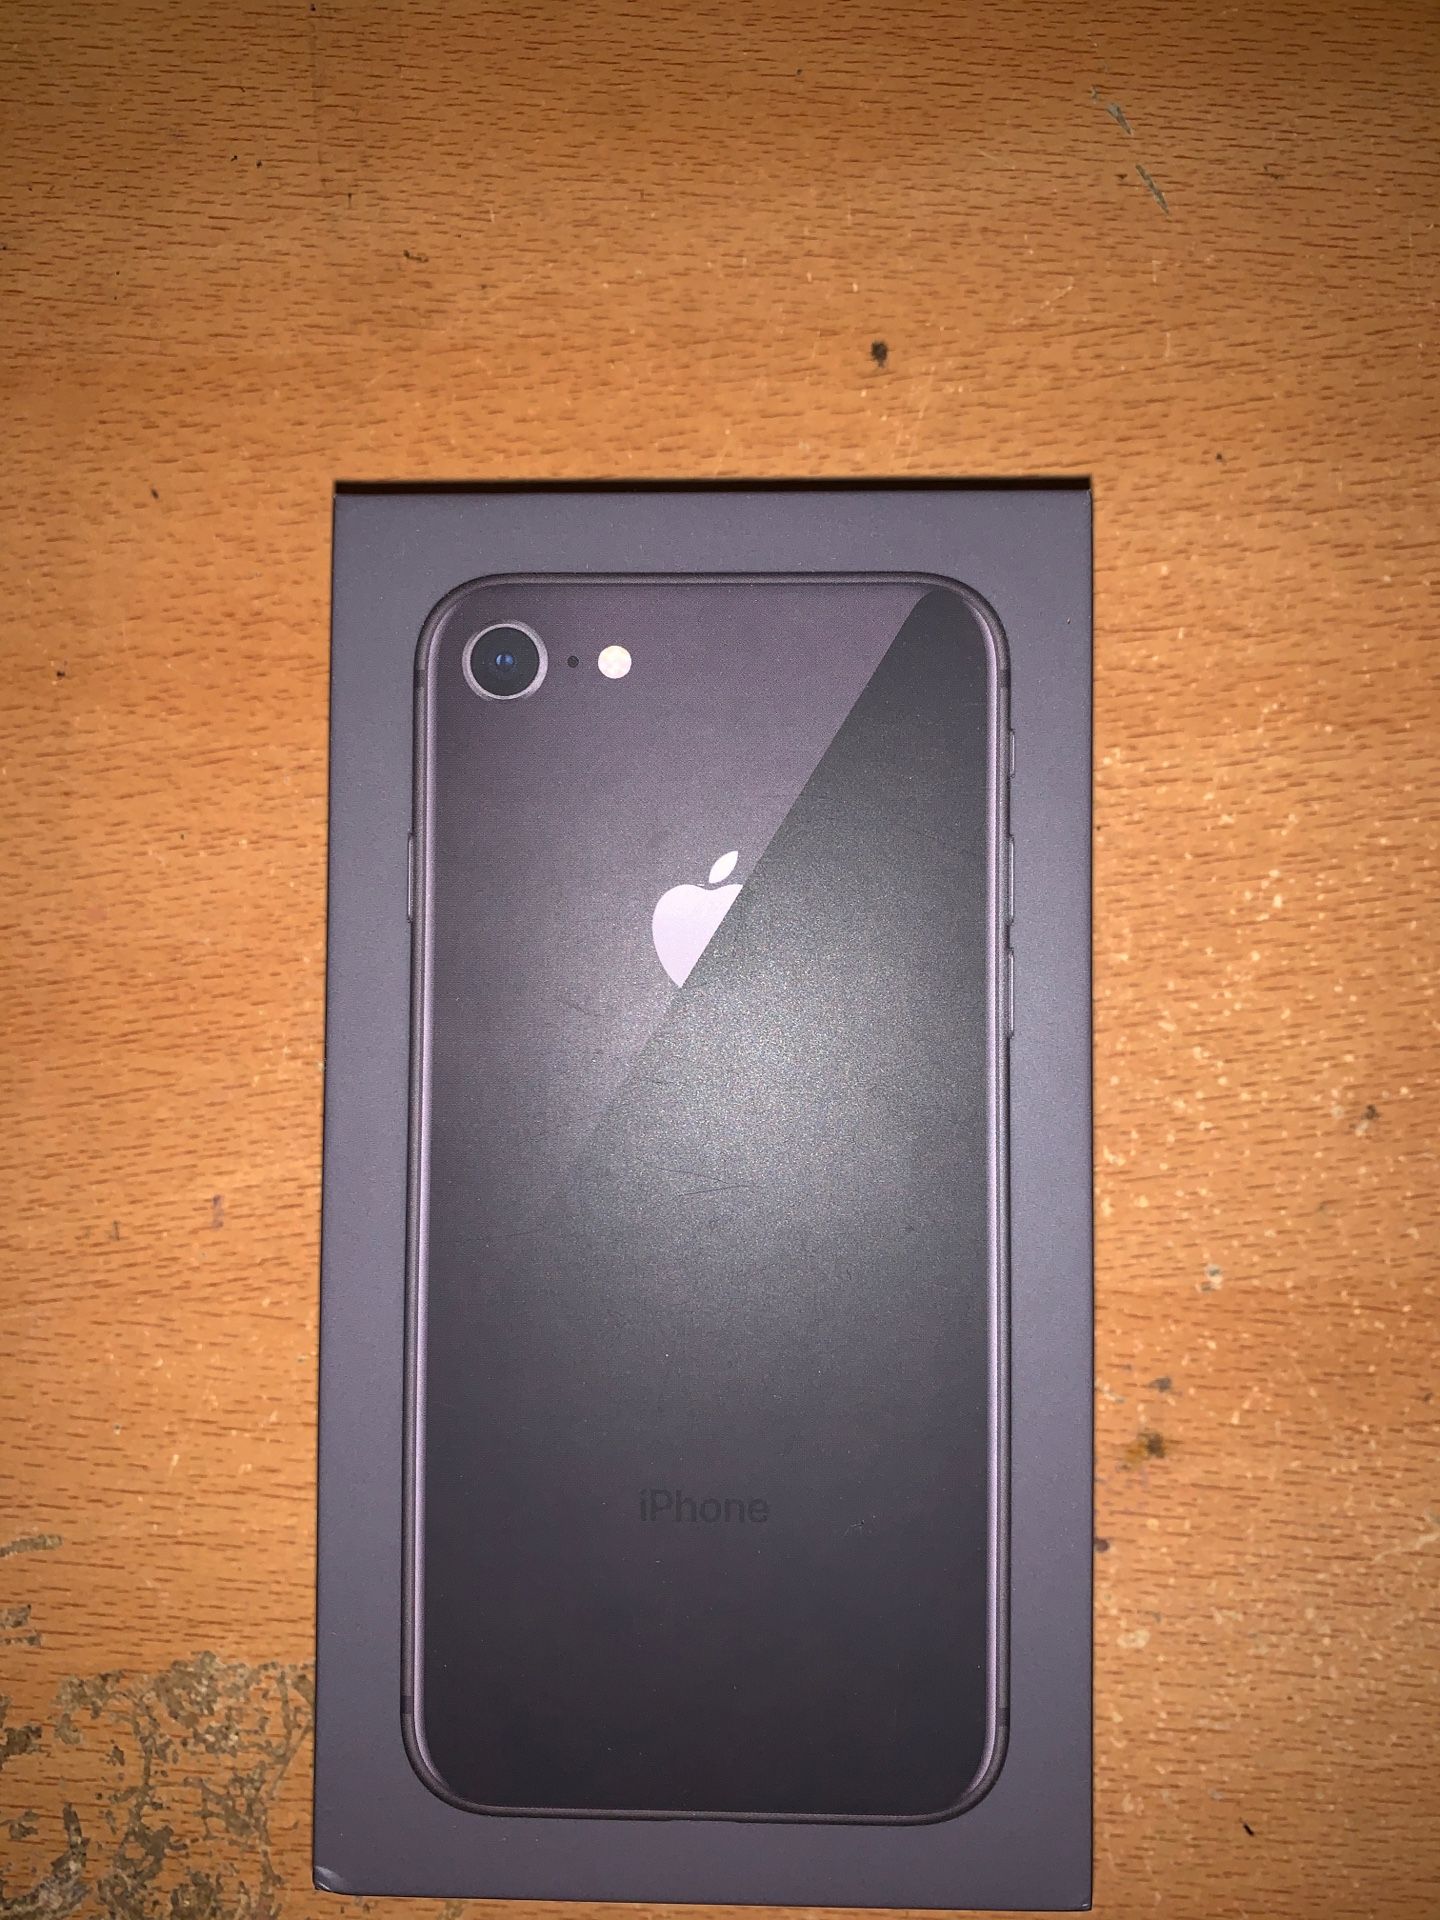 IPHONE 8 64GB (T-Mobile) (BRAND NEW) includes all original accessories